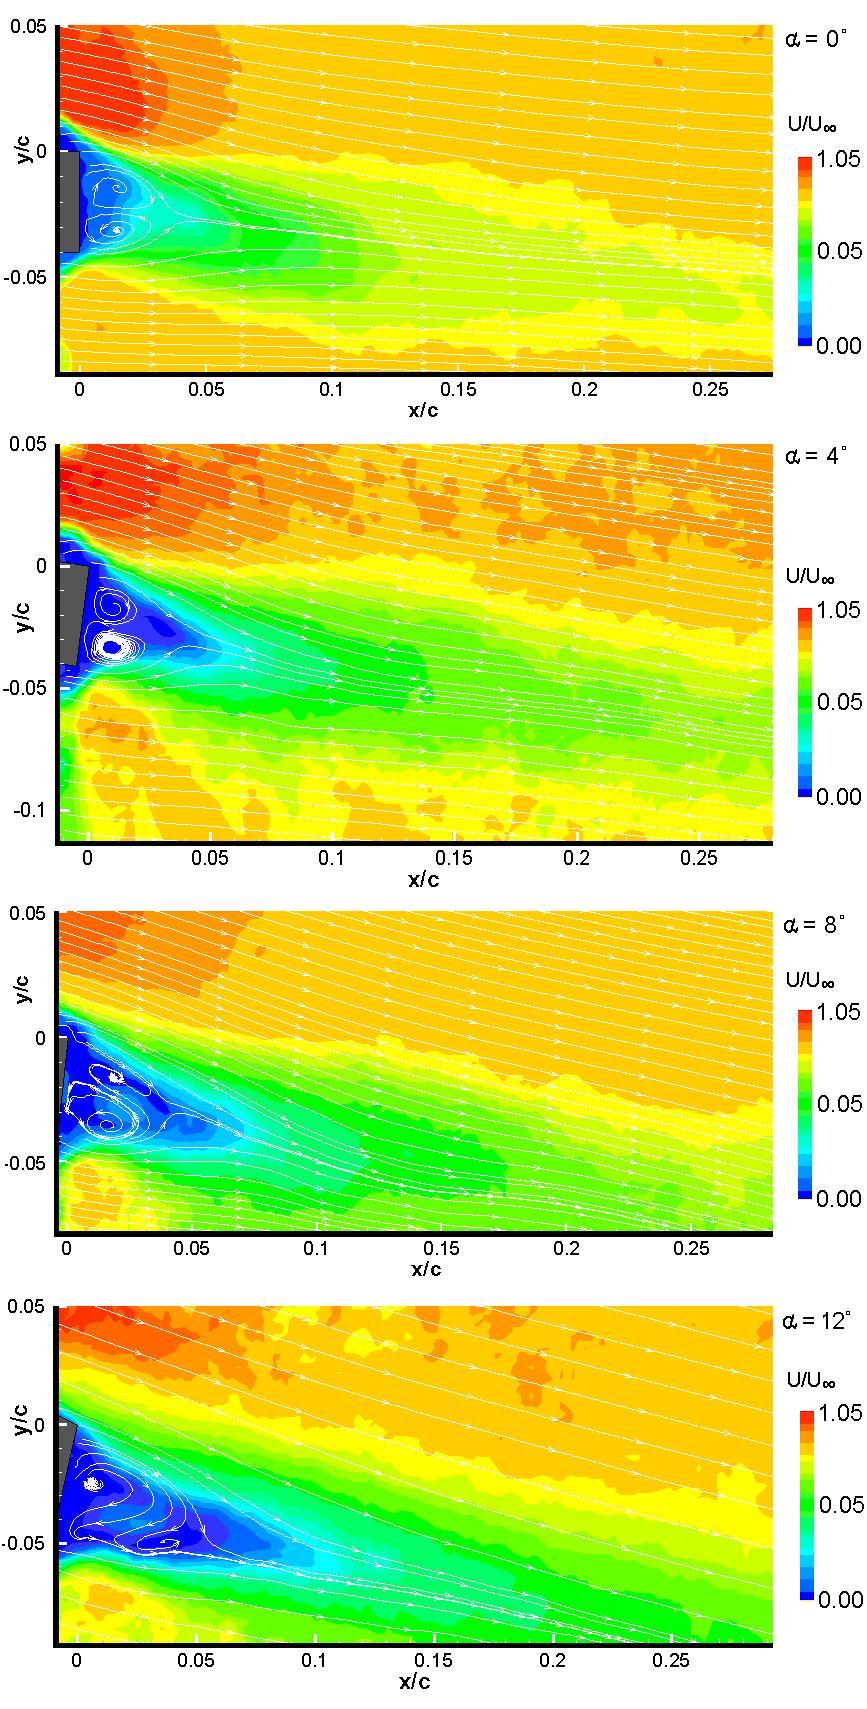 3.3 Ensemble-Averaged PIV Measurements The time-averaged velocity magnitude field with streamlines can be seen in Figure 7 for a 4% Gurney flap at α = 0, 4, 8, and 12.